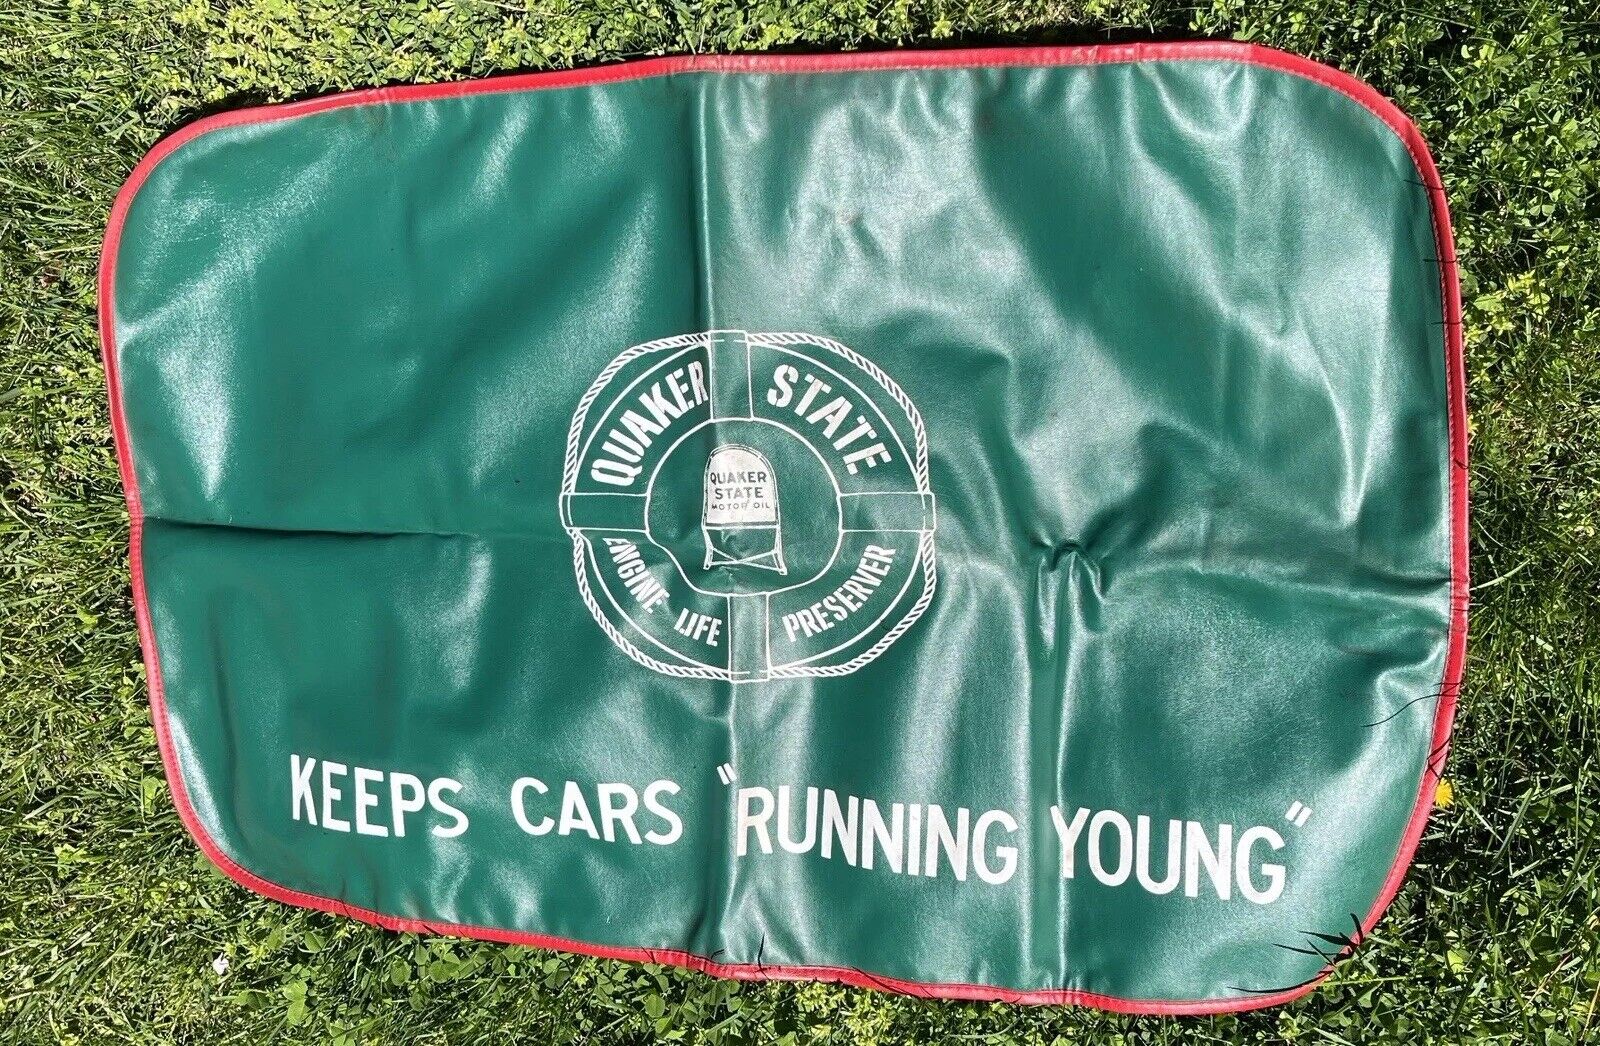 Vintage Quaker State Fender Cover 1960s Automobile Keeps Cars Running Young